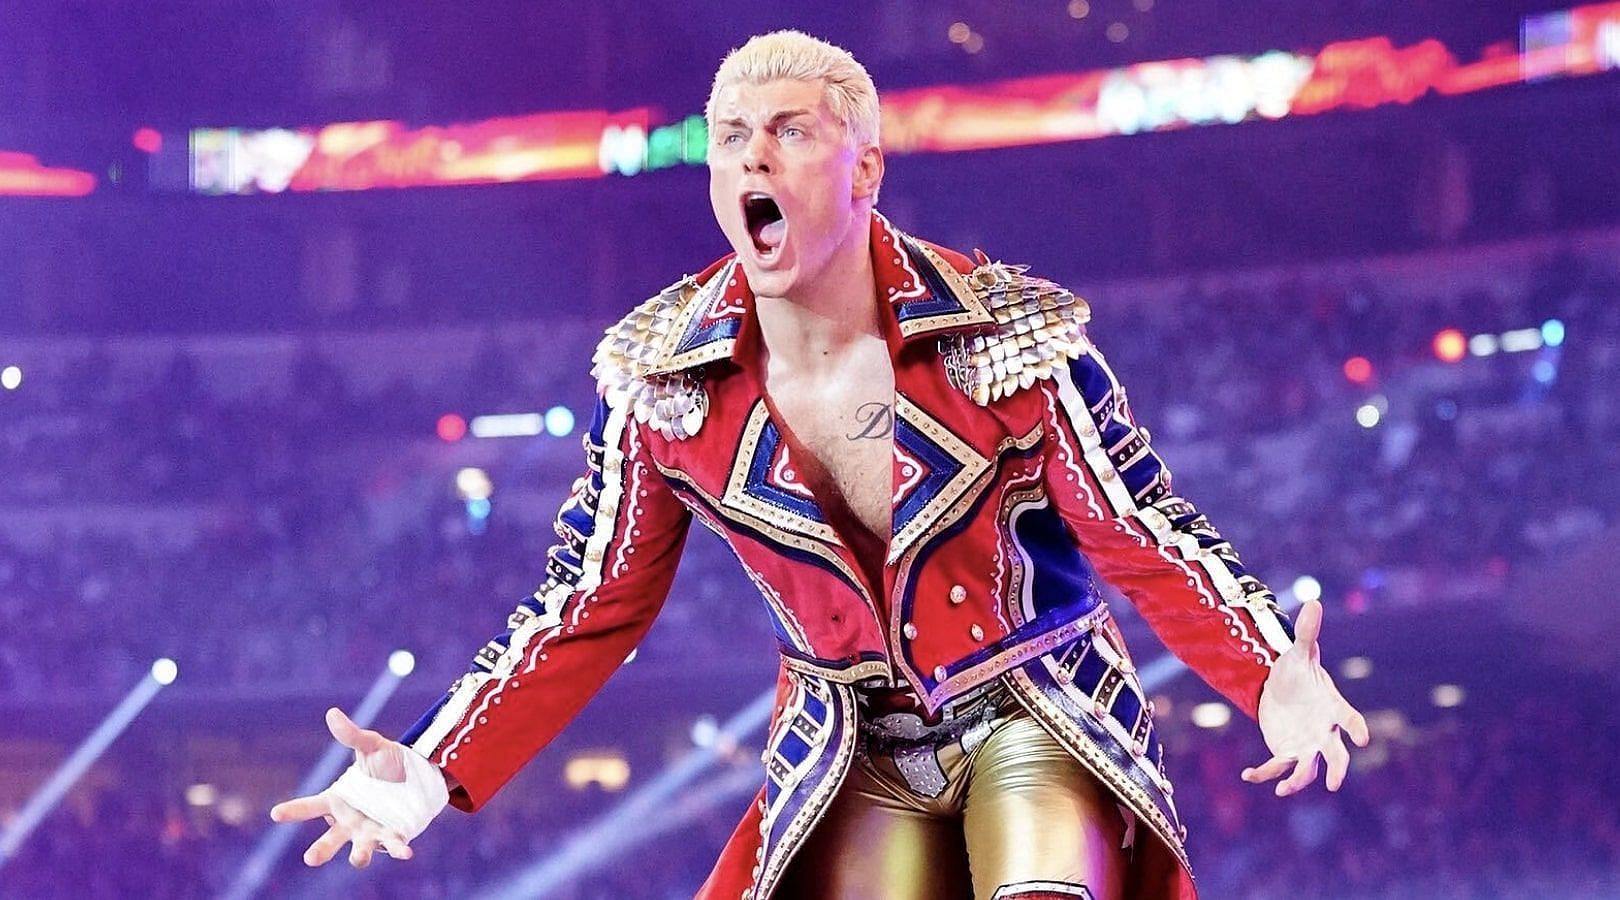 Cody Rhodes is returning for the Royal Rumble!